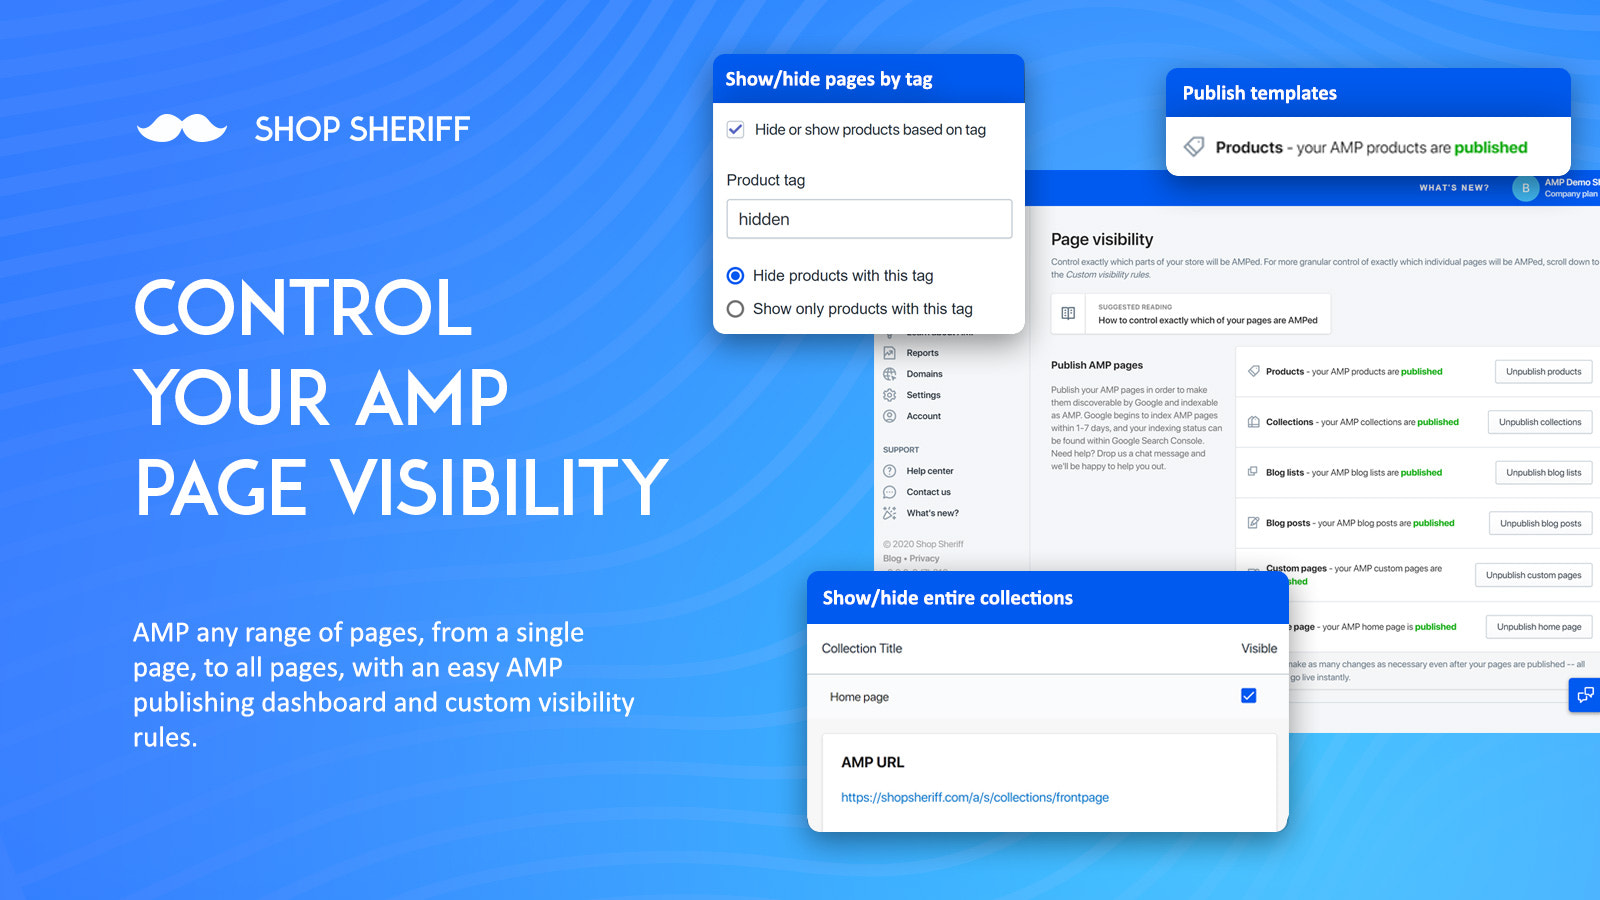 AMP Control page visibility, hide/show products, collections etc